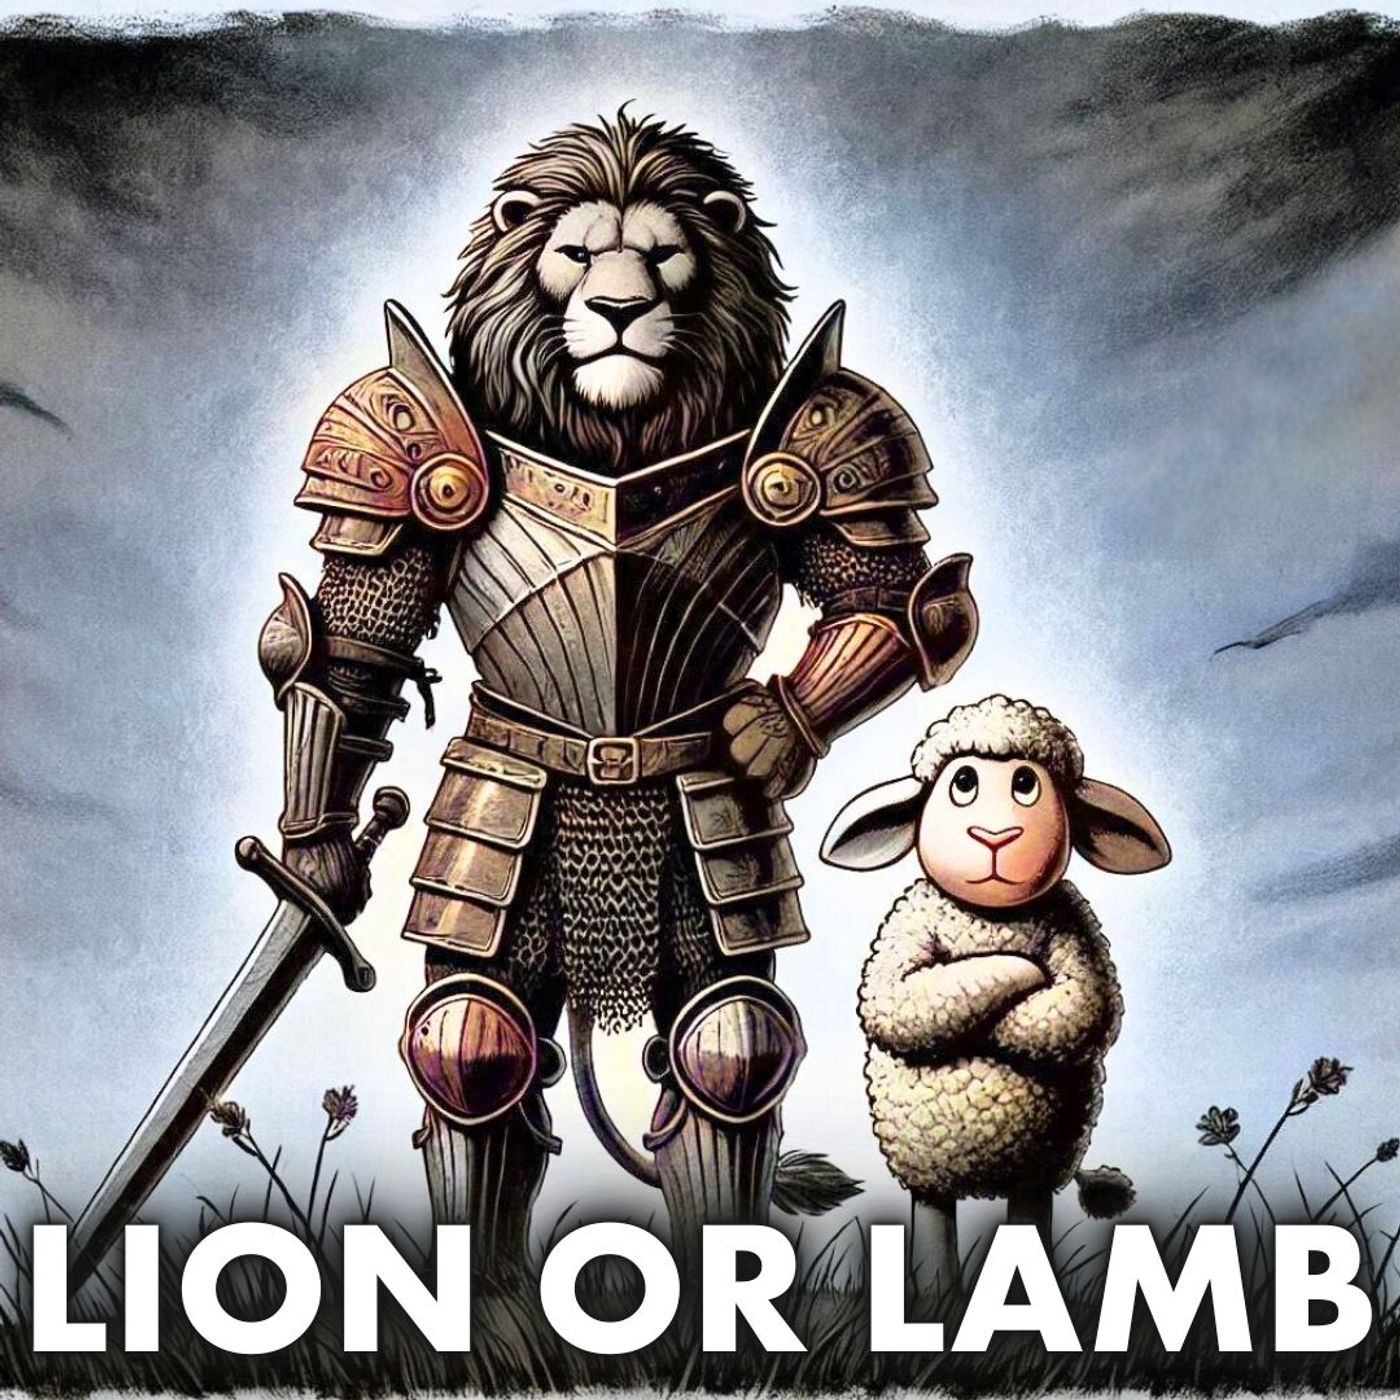 Are You A Lion or a Lamb⁉️